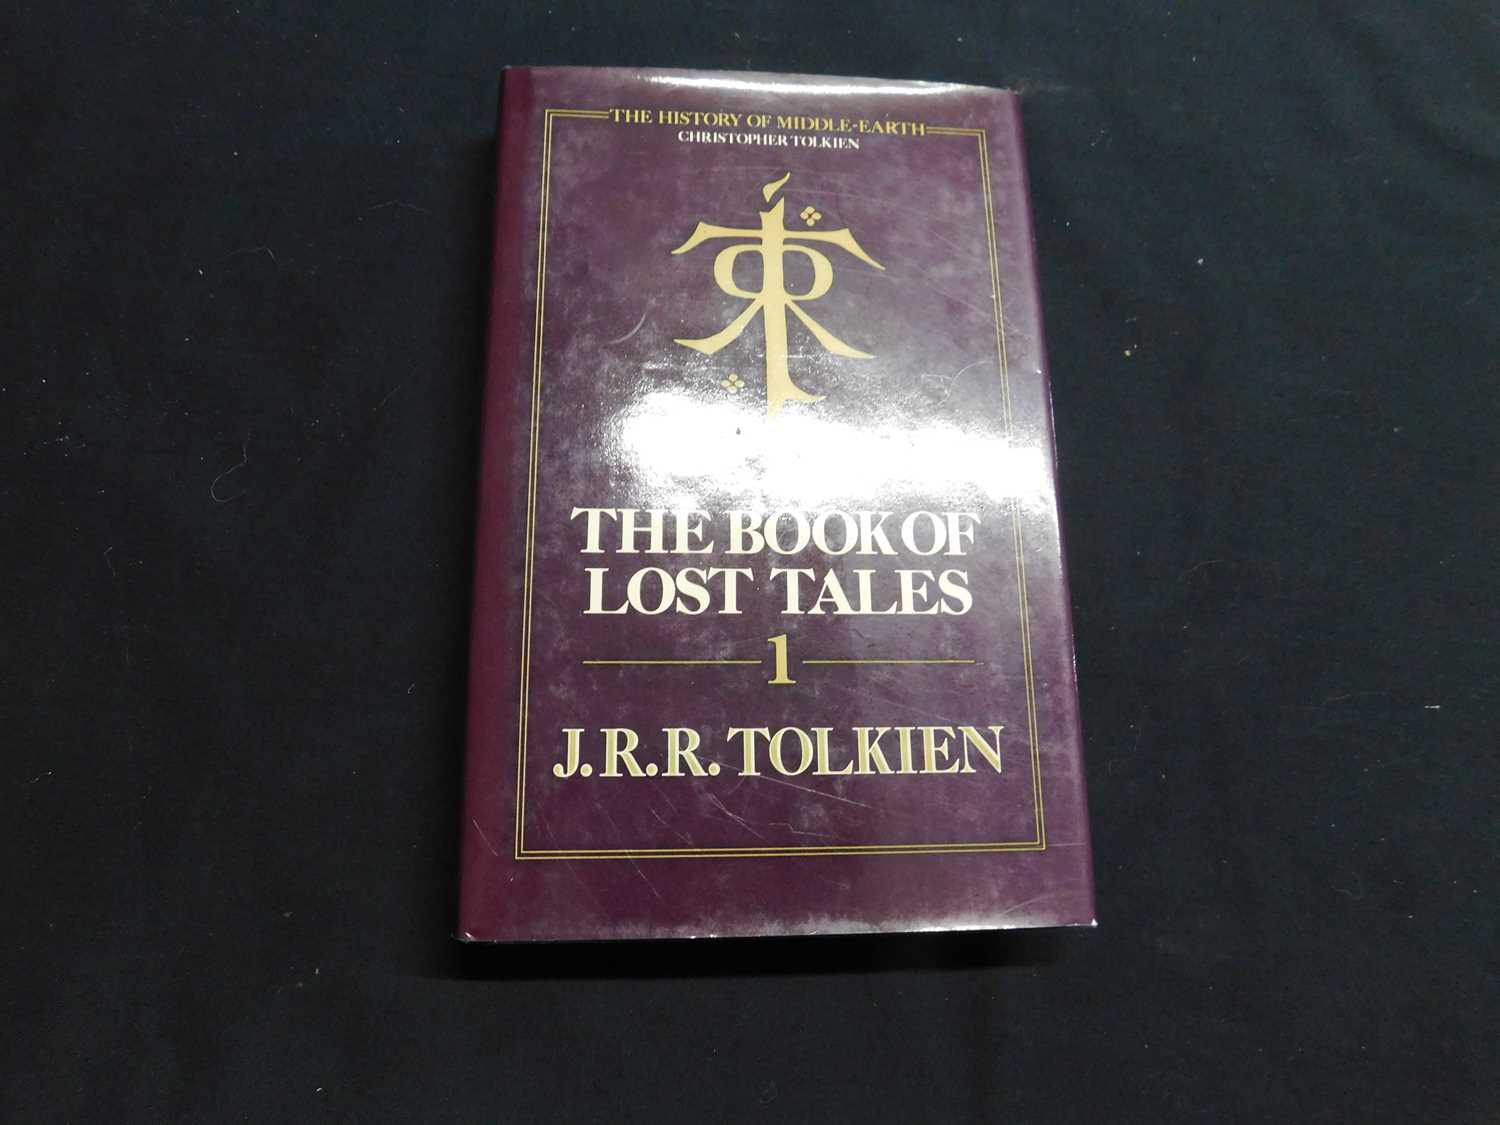 J R R TOLKIEN: THE HISTORY OF MIDDLE-EARTH - THE BOOK OF LOST TALES, PARTS 1 AND 2 - THE LAYS OF